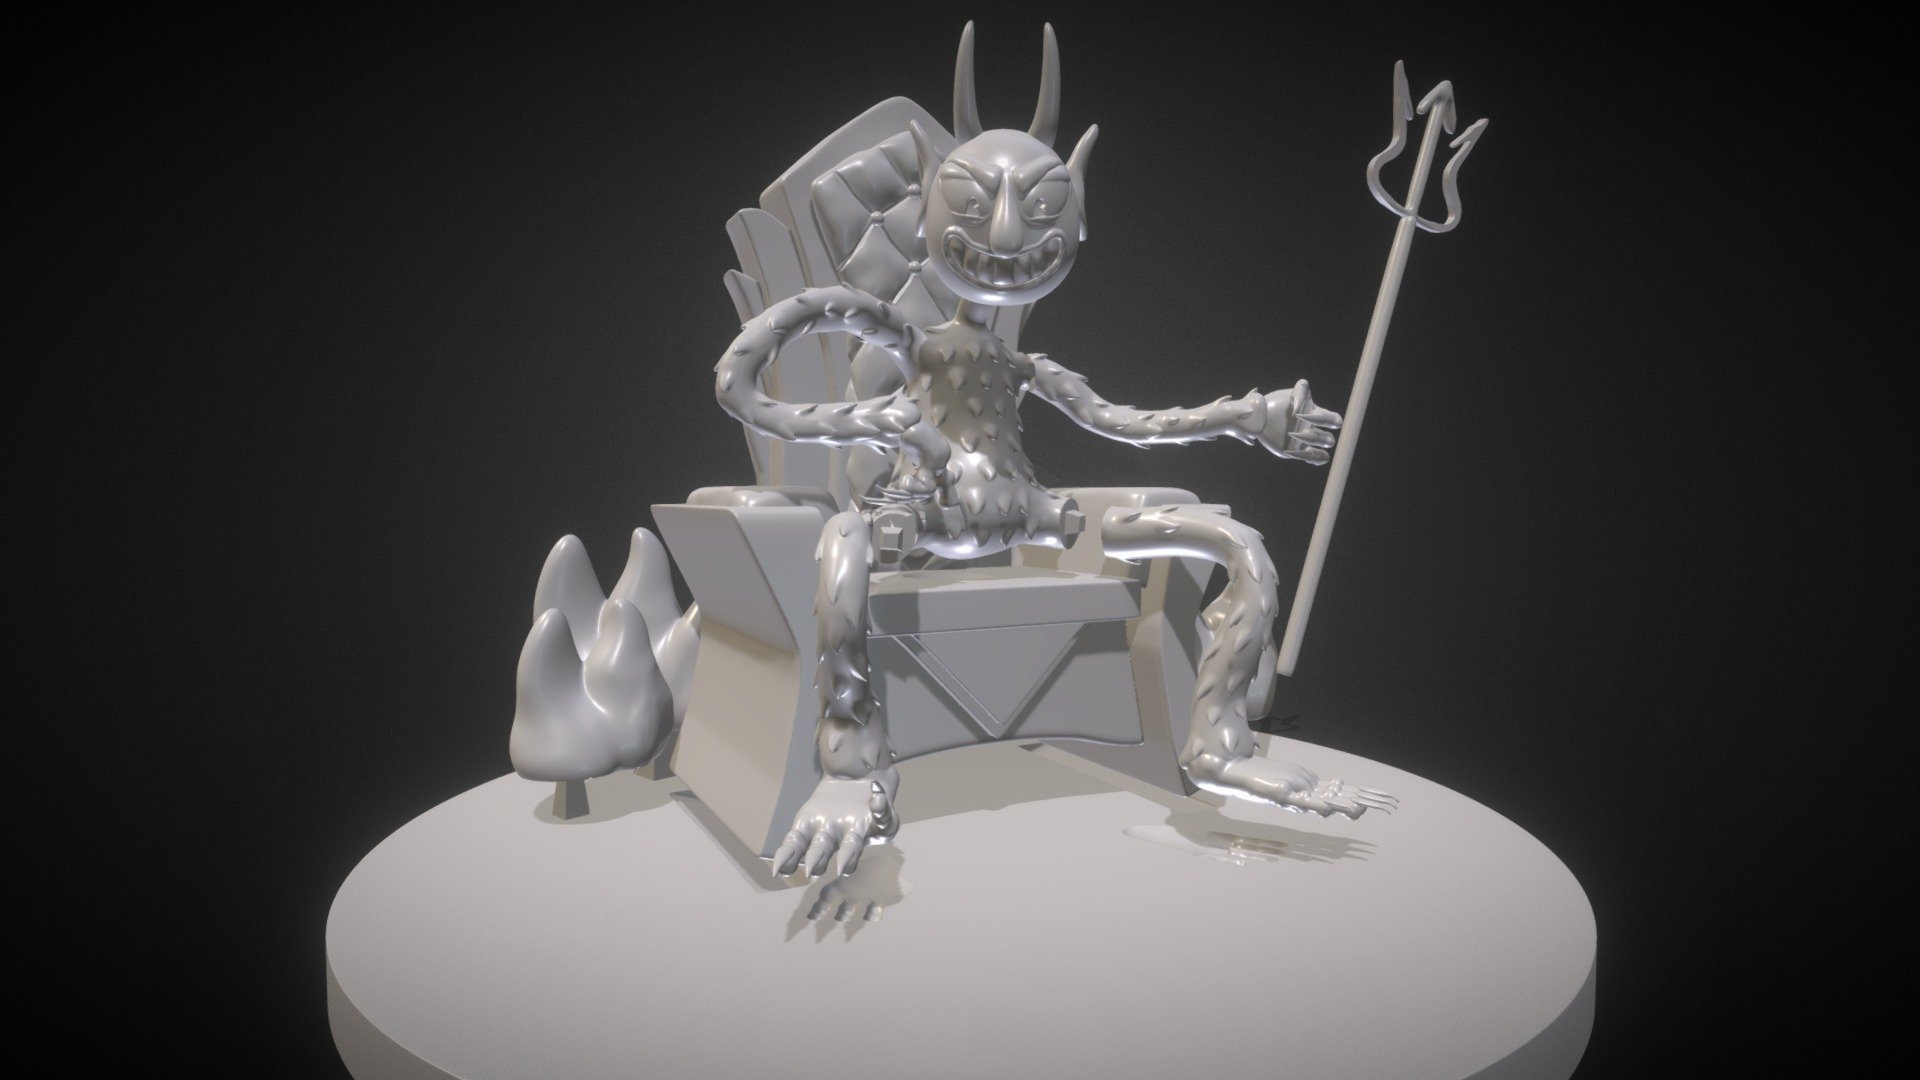 A sculpture of The Devil from the video game Cuphead ready for 3d print I separate the parts for easy 3d print I included the OBJ, STL, and ZBrush Tool files if you need 3D game assets or stl files I can do commission works 3d model